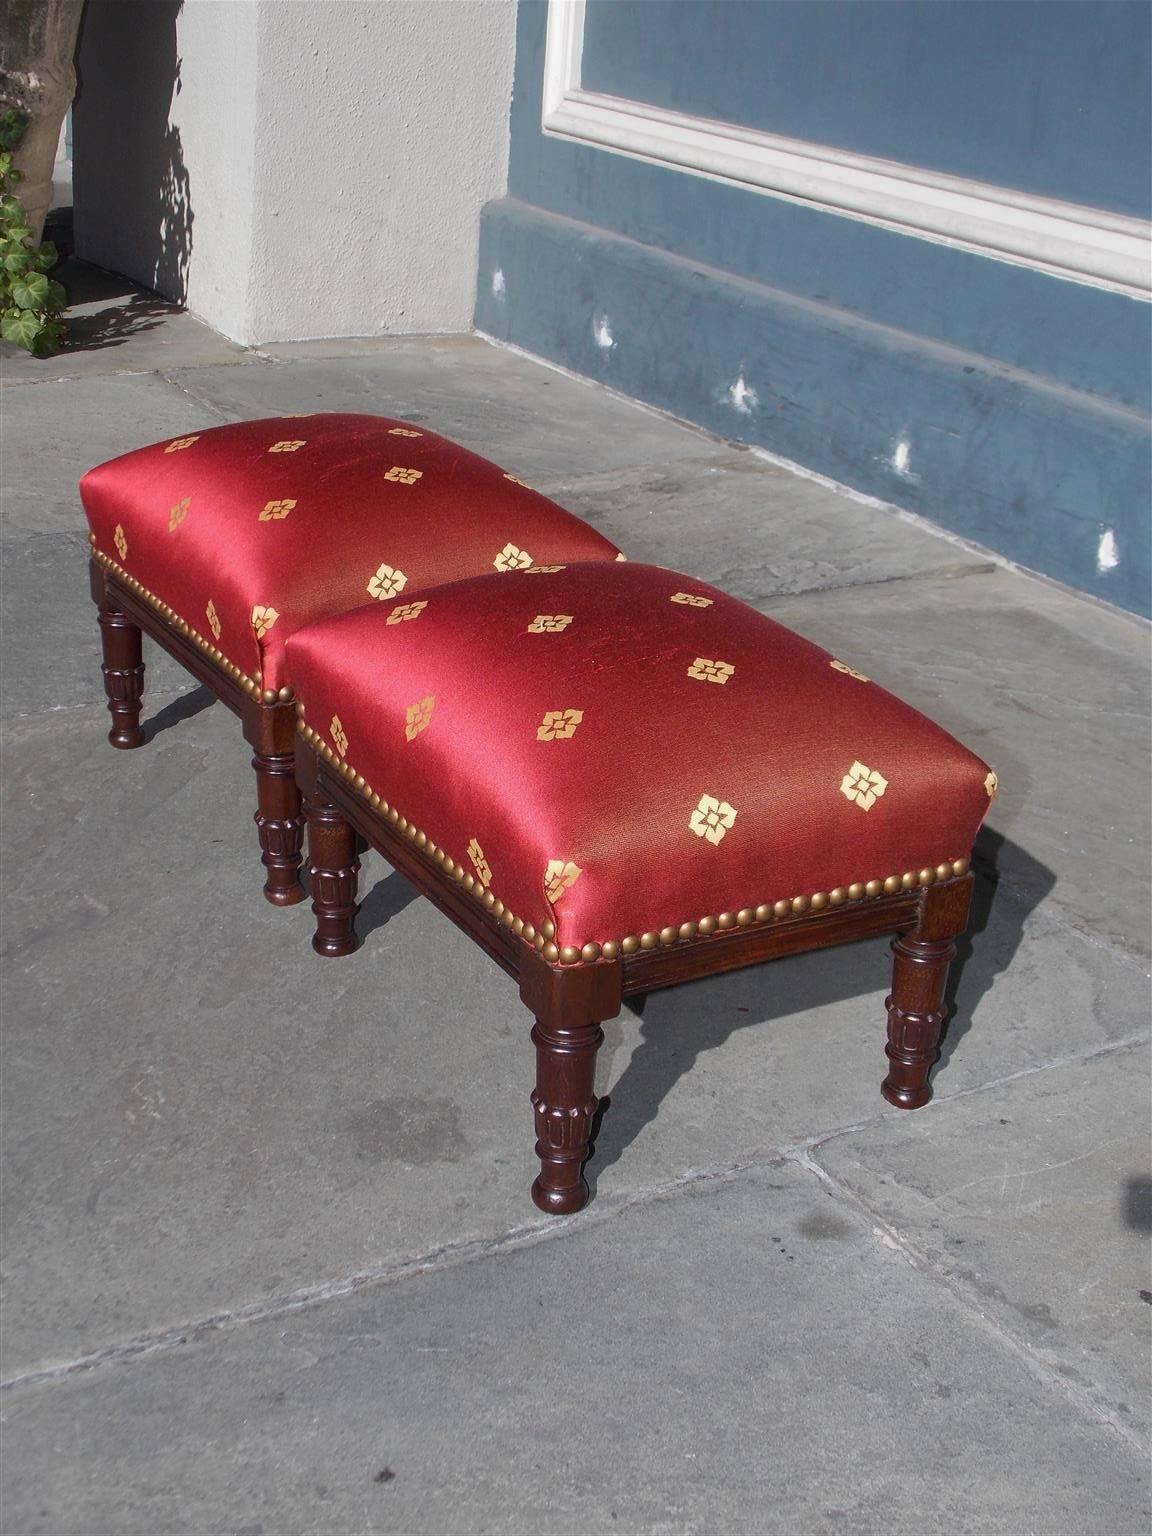 Pair of American mahogany Classical foot stools with floral silk upholstery, brass tacks, and resting on turned carved ringed legs, Early 19th century.